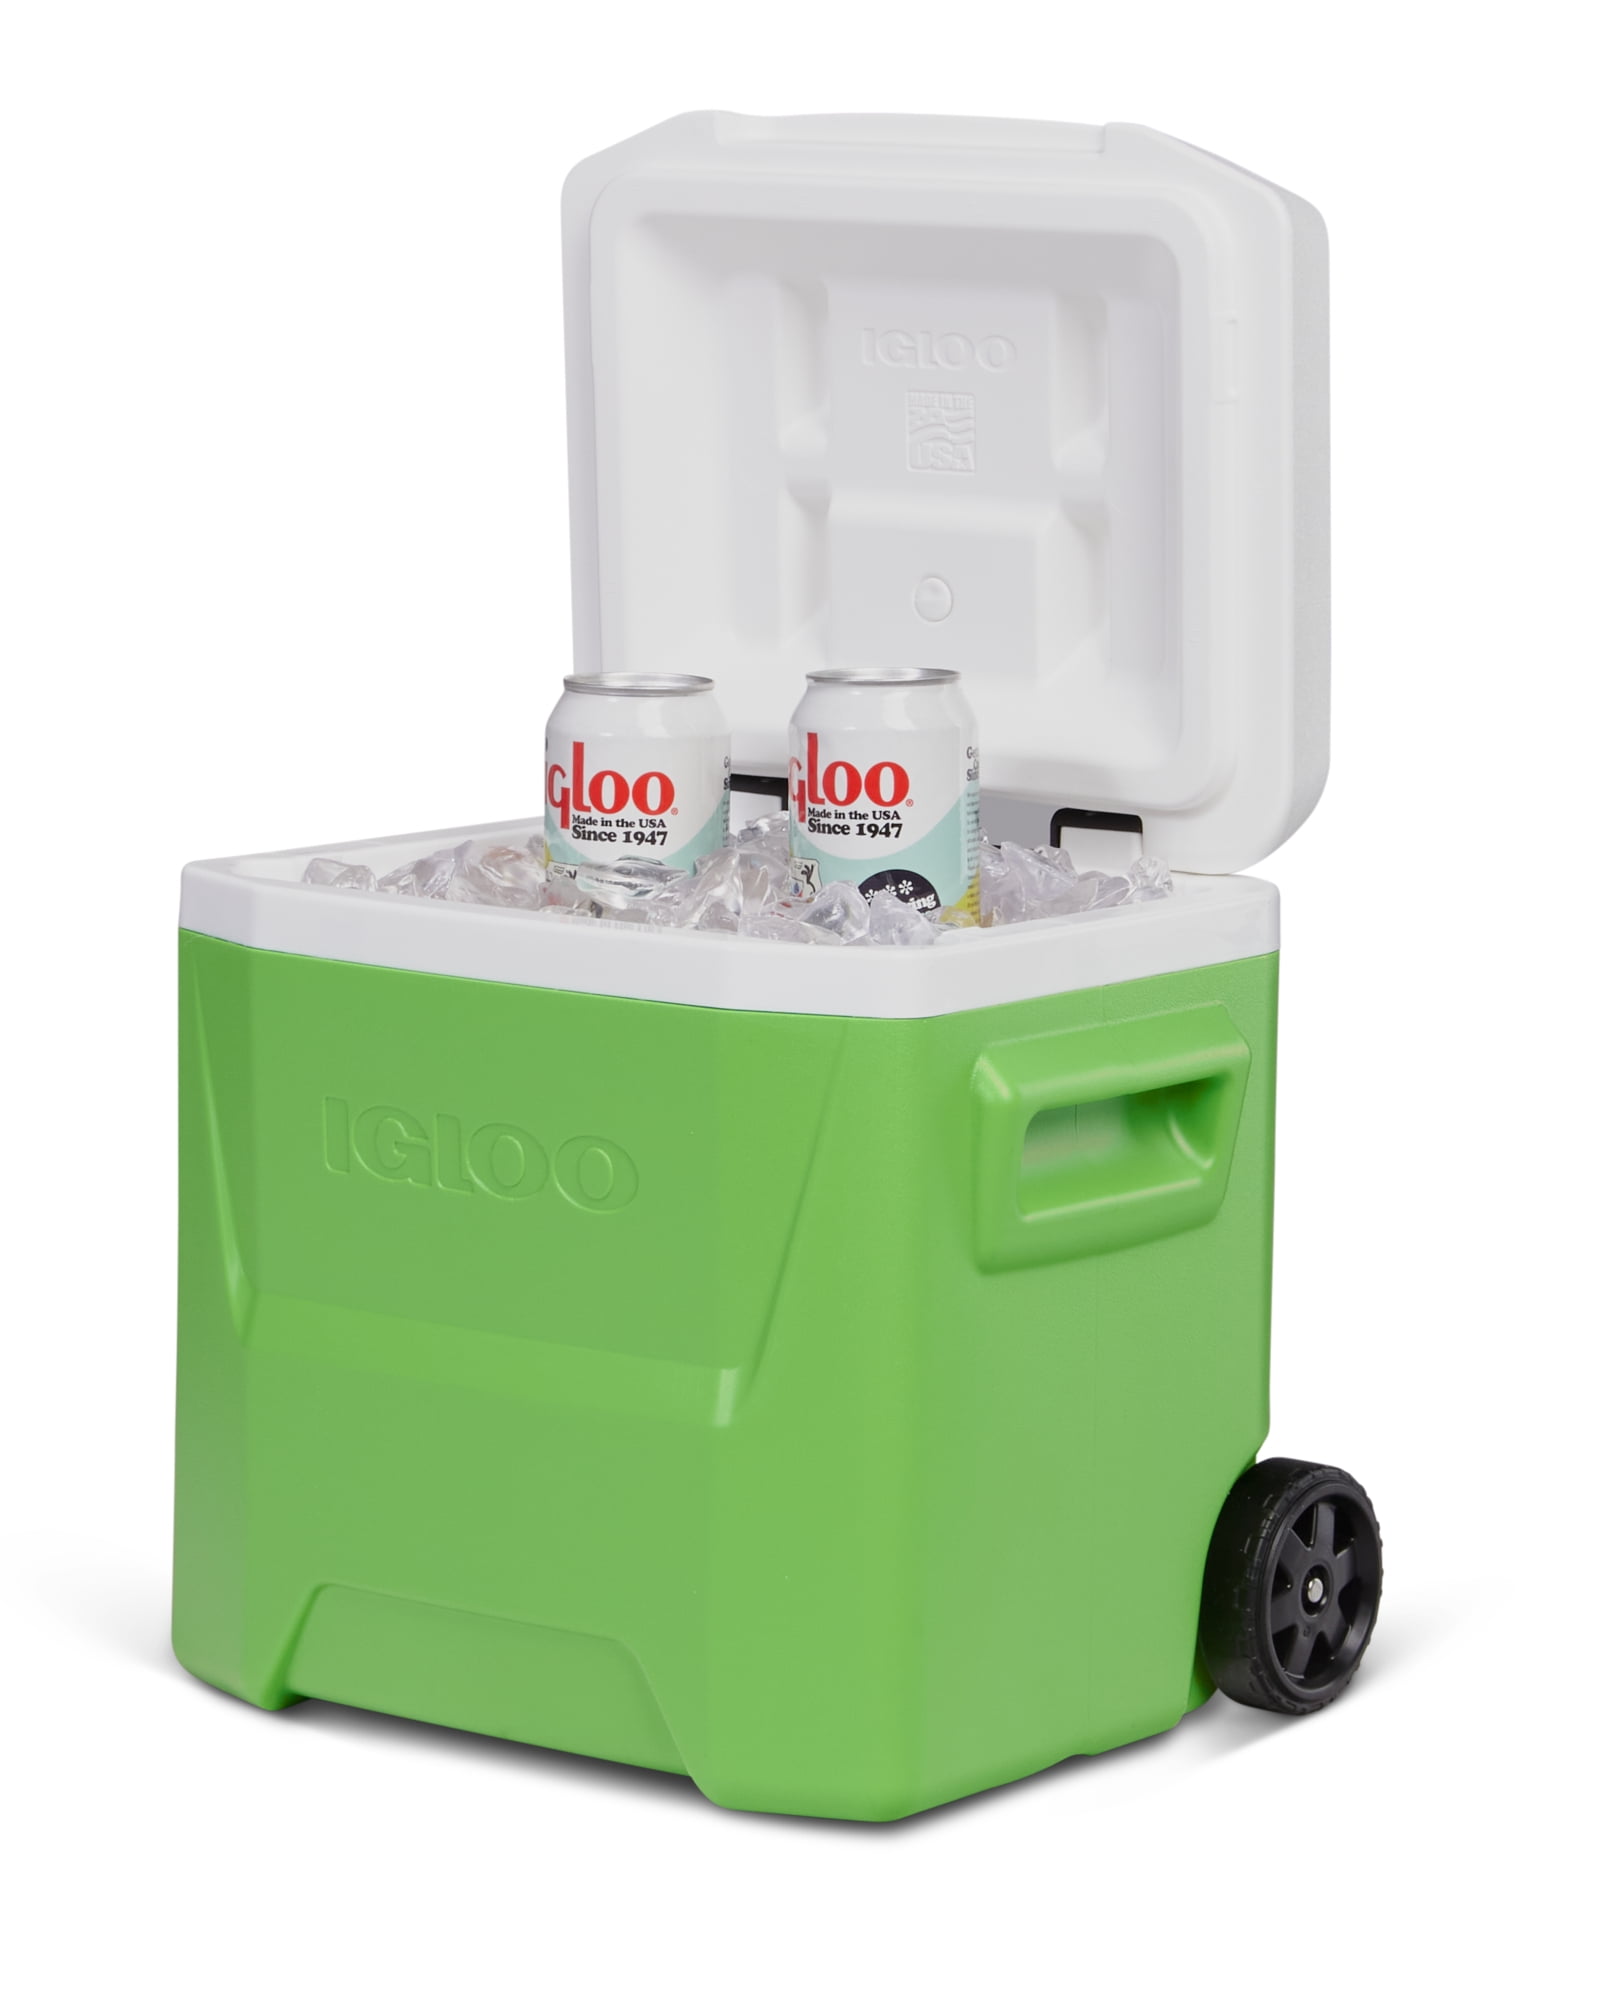 Blue NEW Igloo 16-Quart Laguna Roller Ice Chest Cooler with Wheels 